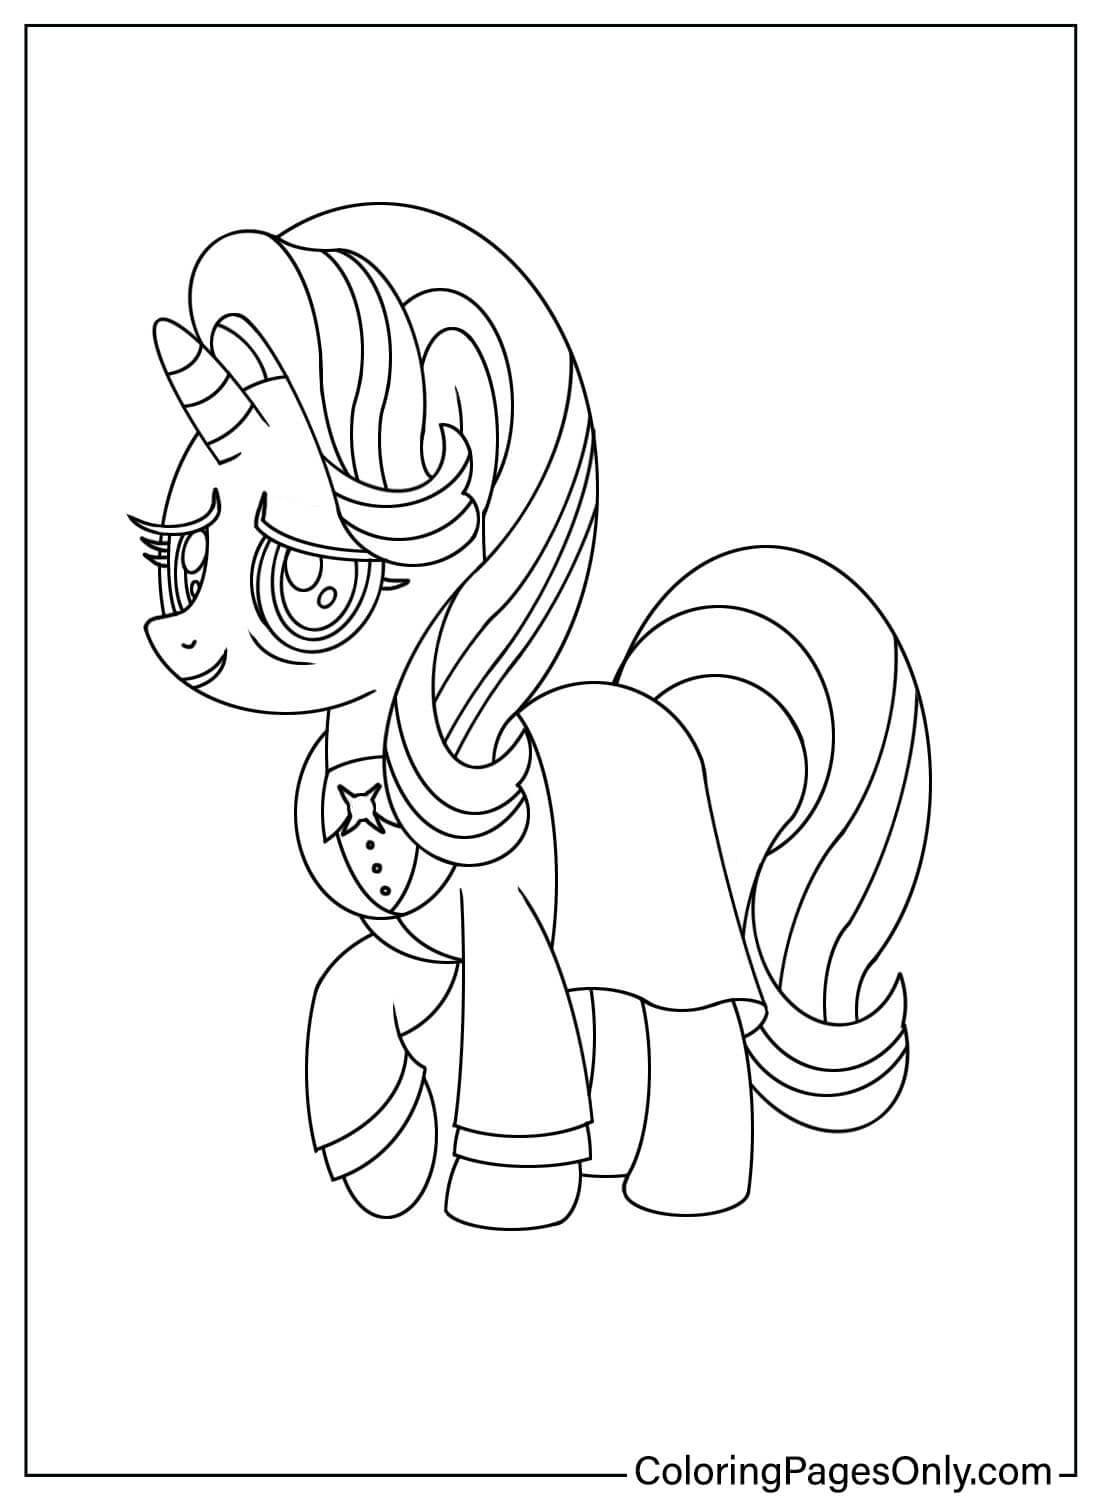 Starlight Glimmer Coloring Page Printable from Starlight Glimmer